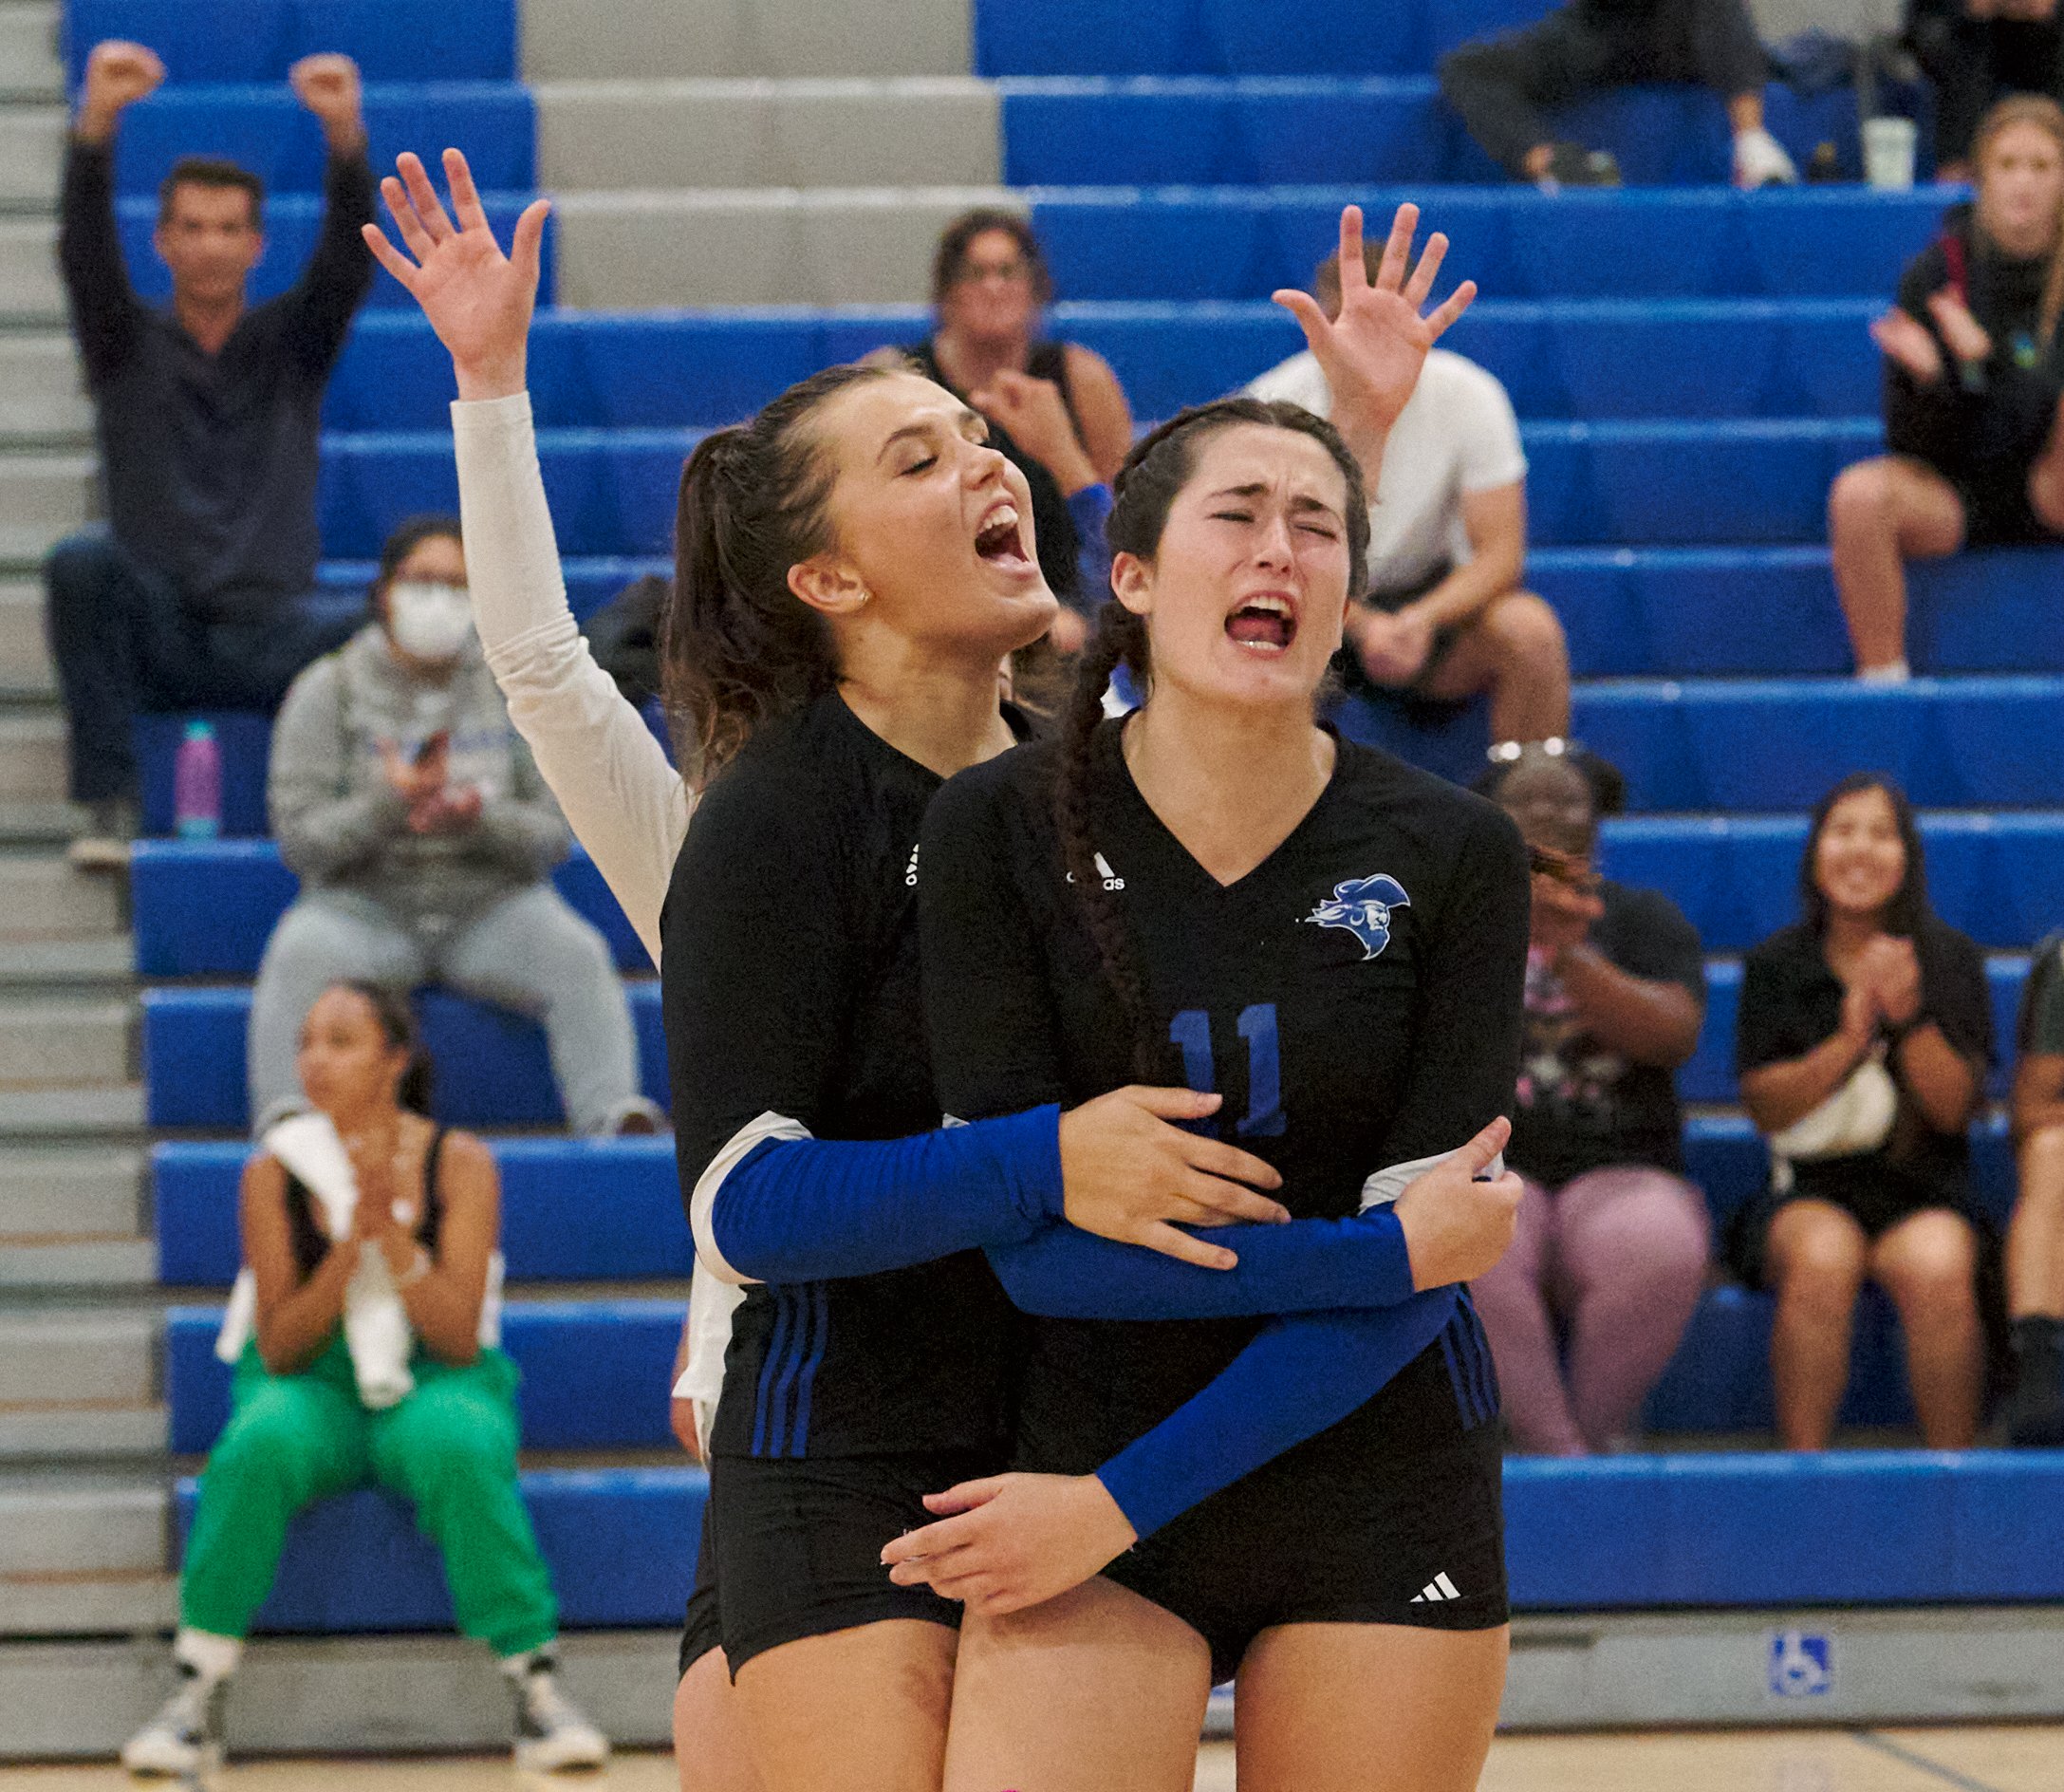  Santa Monica College Corsairs' Mackenzie Wolff and Maiella Riva, and Halle Anderson's jazz hands, after scoring a point during the women's volleyball match against the Moorpark College Raiders on Friday, Sept. 23, 2022, at the Corsair Gym in Santa M